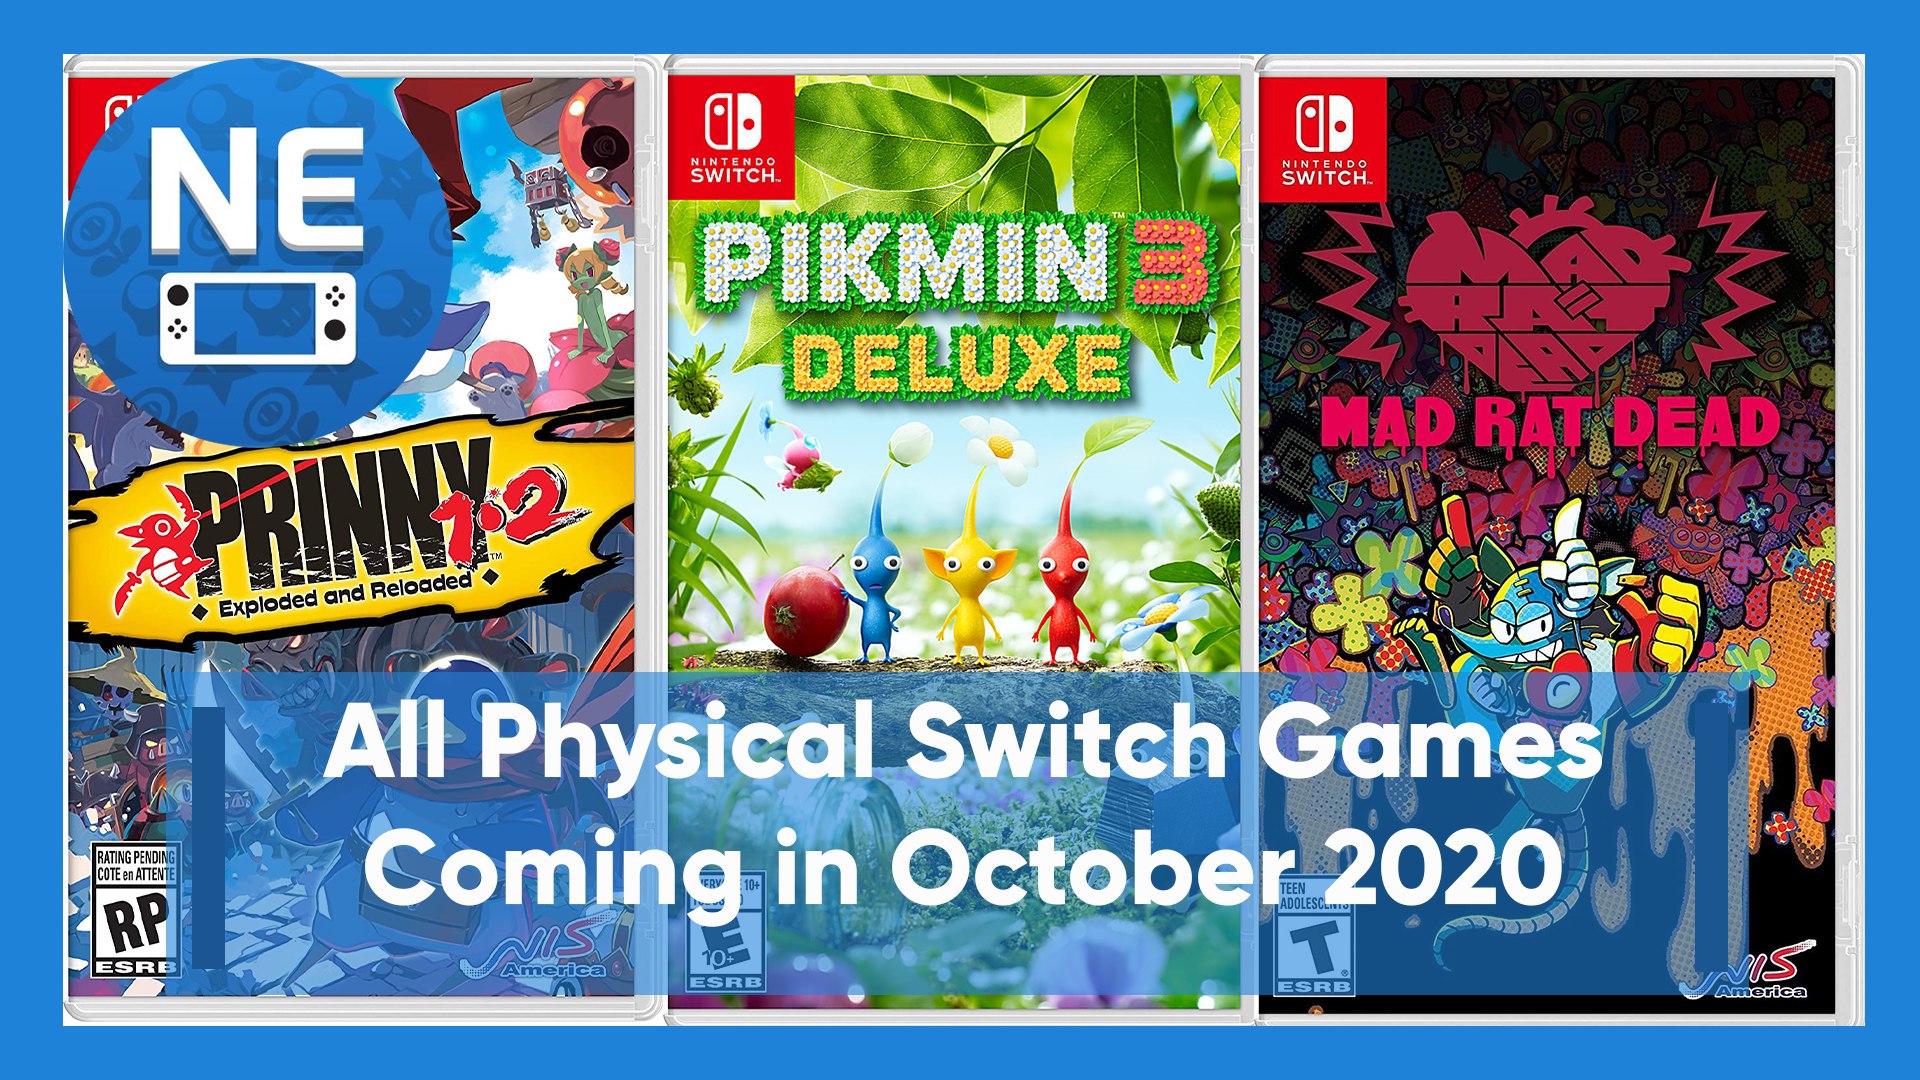 switch games coming soon